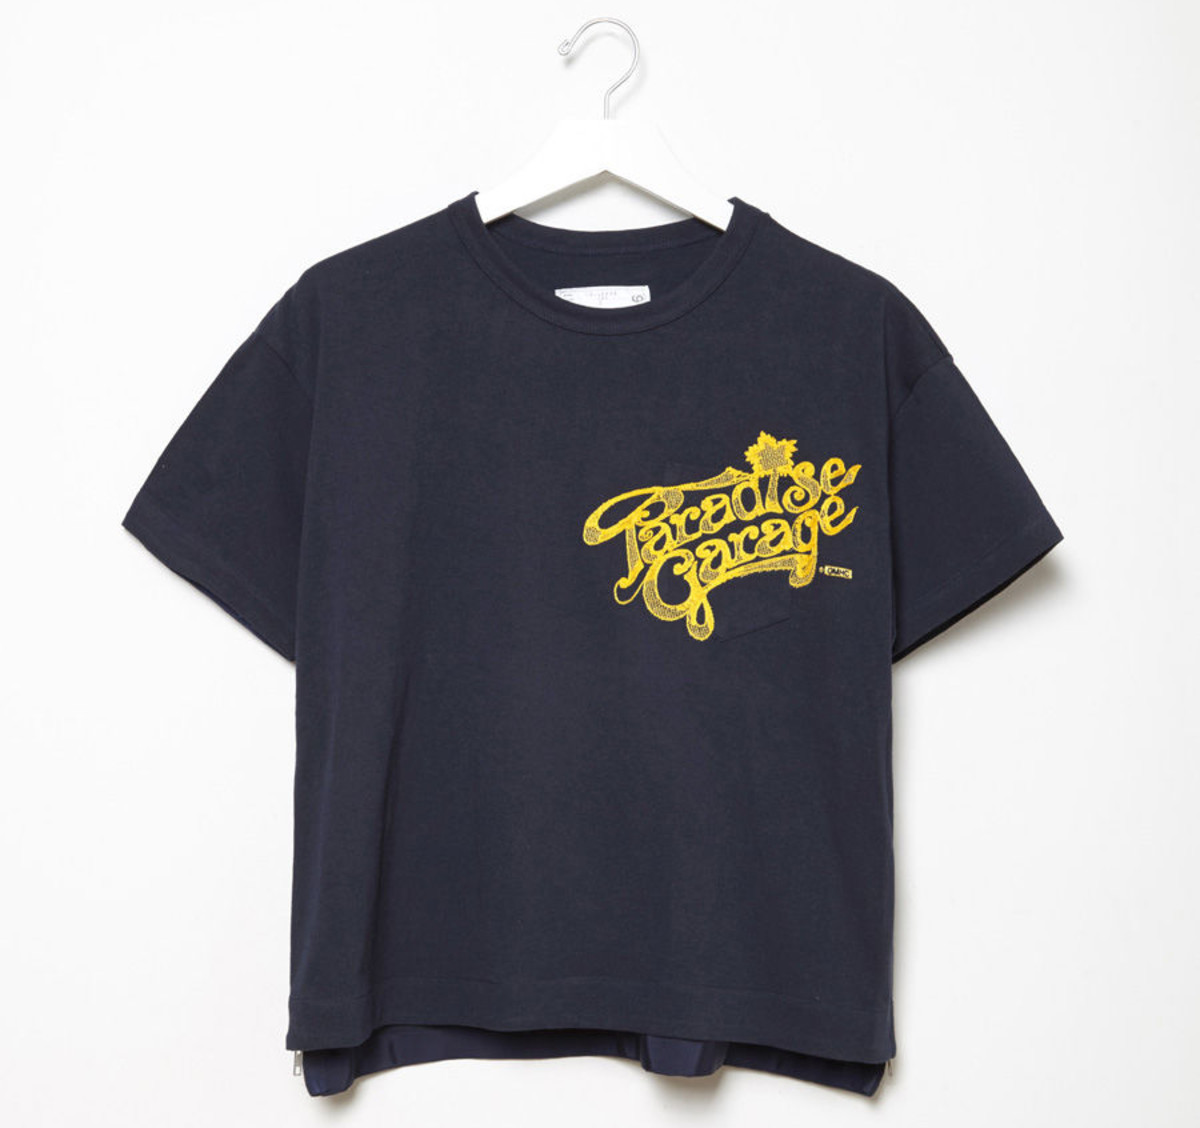 Sacai "Paradise Garage" Embroidered Tee, $300, available at LaGarconne.com.